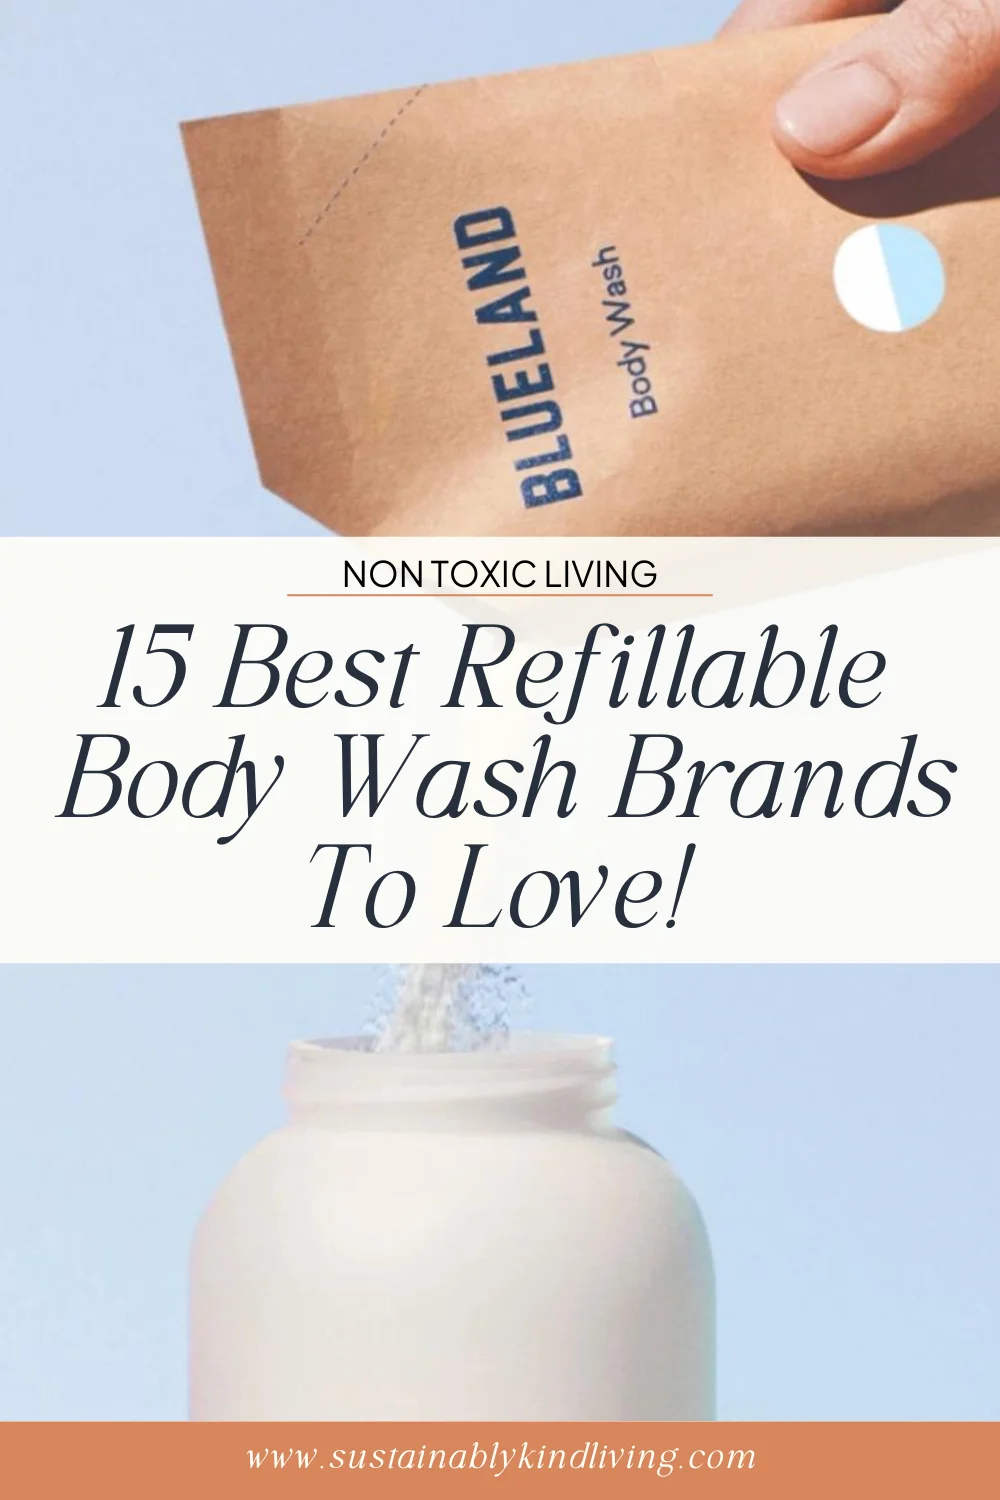 refillable body wash